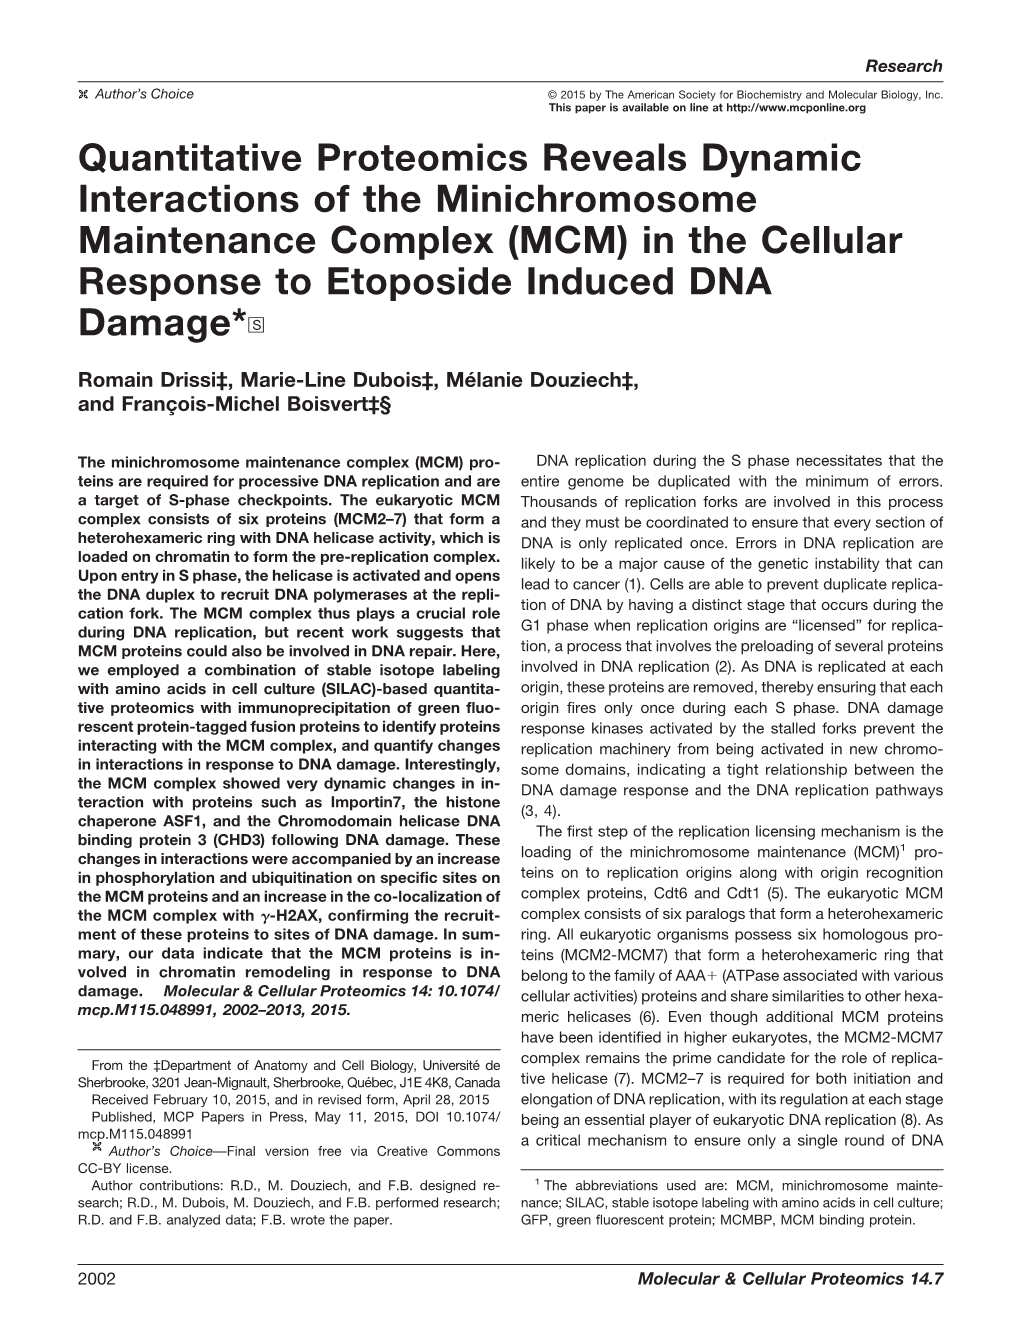 Quantitative Proteomics Reveals Dynamic Interactions of the Minichromosome Maintenance Complex (MCM) in the Cellular Response to Etoposide Induced DNA Damage*□S